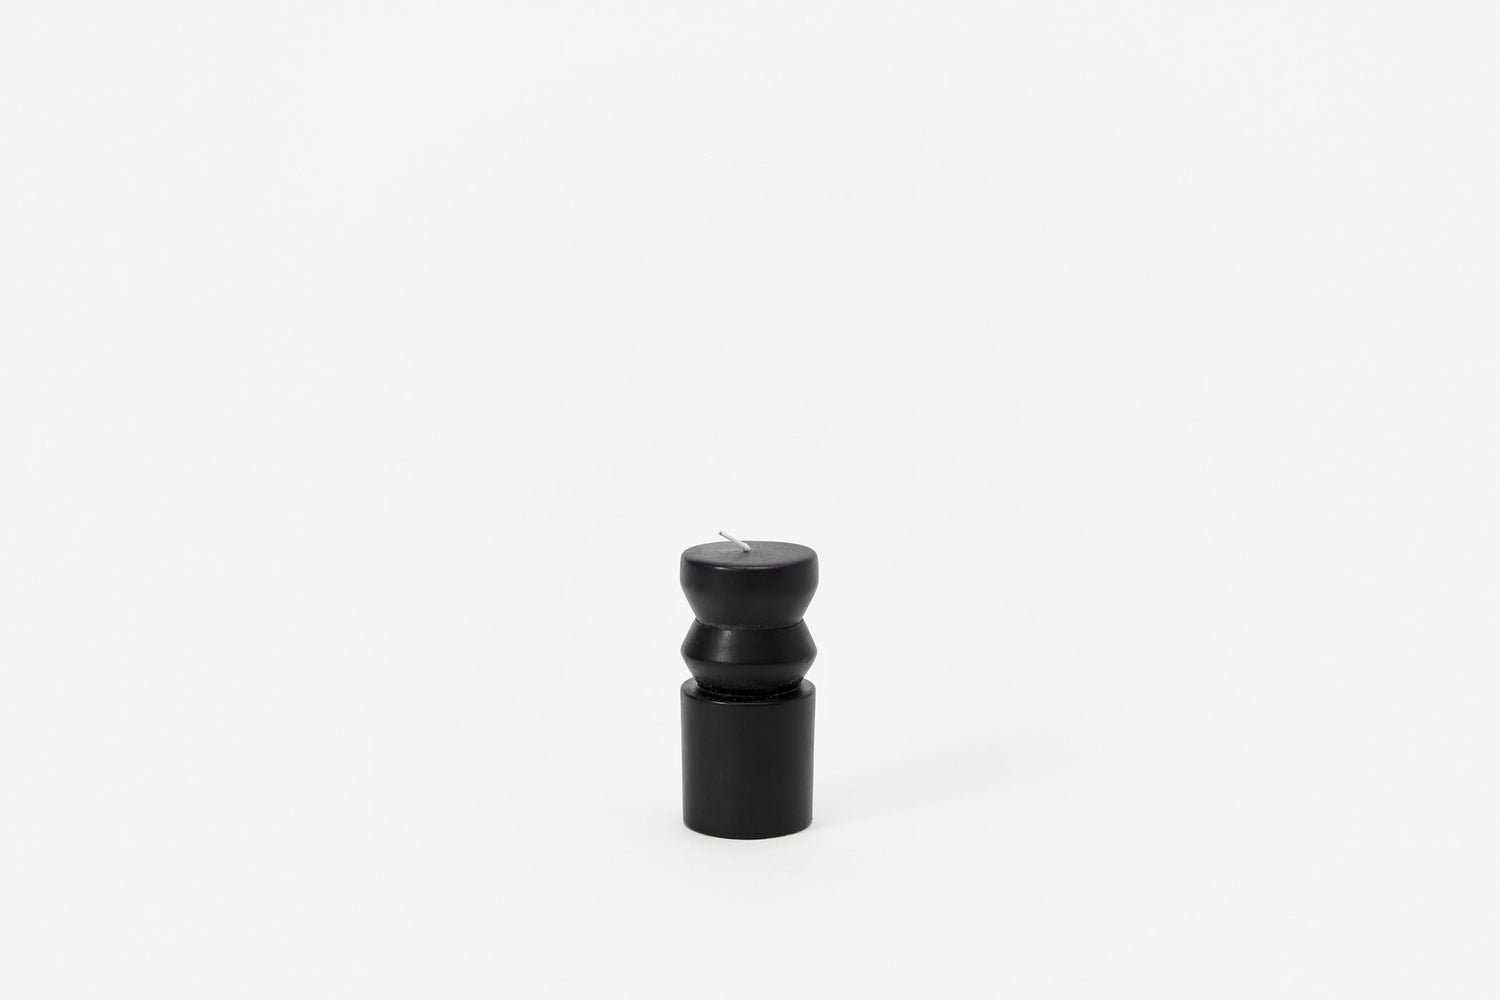 Areawear Totum Candle in Black, small. Available at Easy Tiger Goods Toronto.